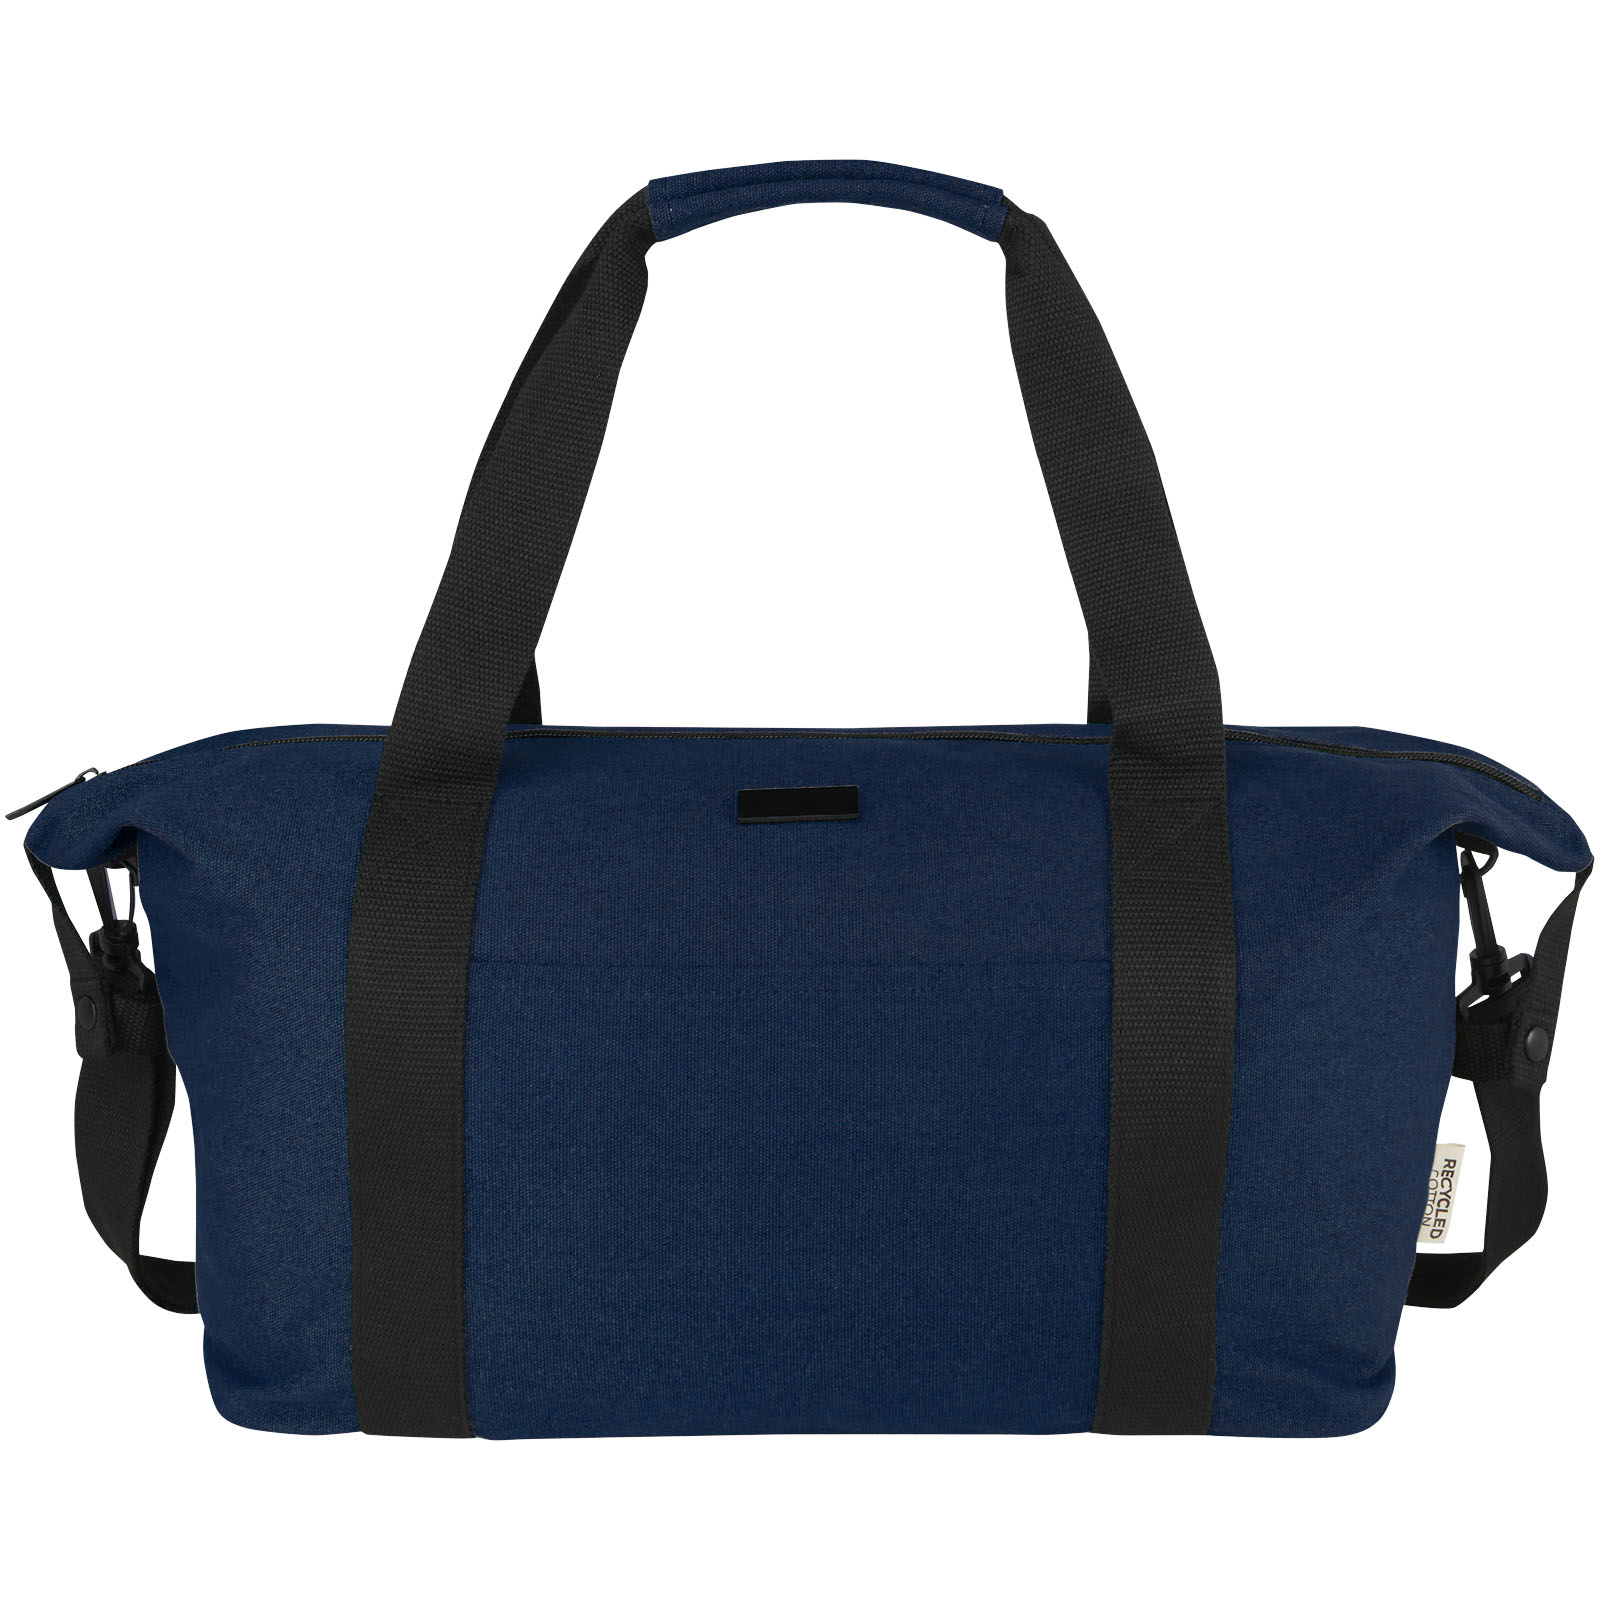 Advertising Sport & Gym bags - Joey GRS recycled canvas sports duffel bag 25L - 1